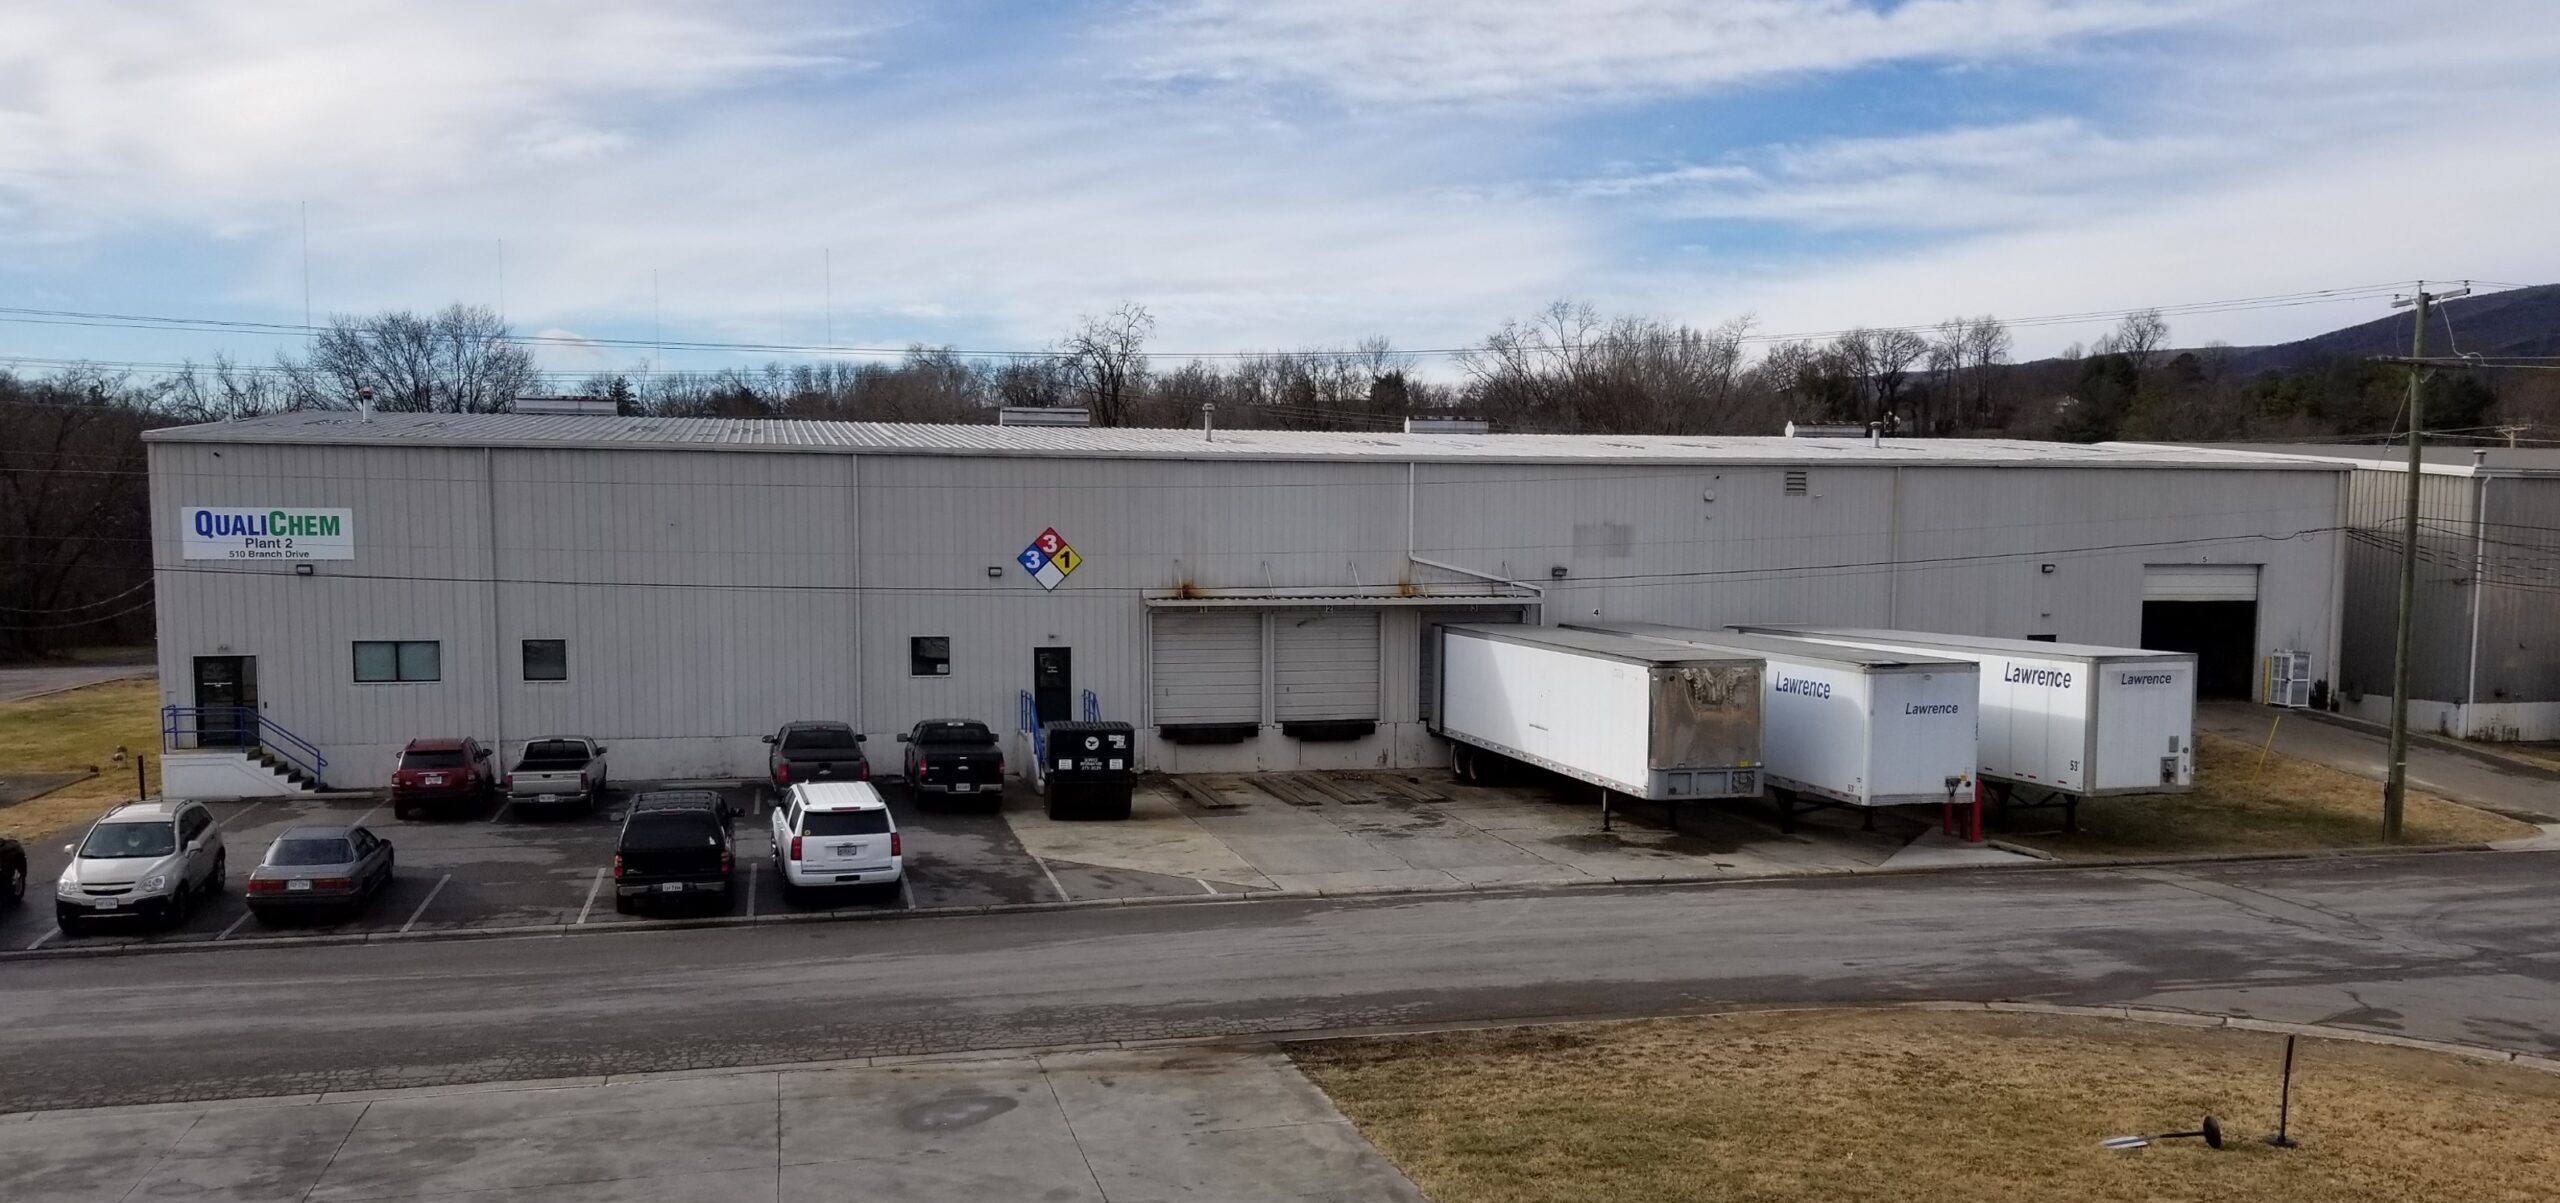 An exterior view of the plant 2 QualiChem building with a parking lot in front and several trailers docked at the loading area.